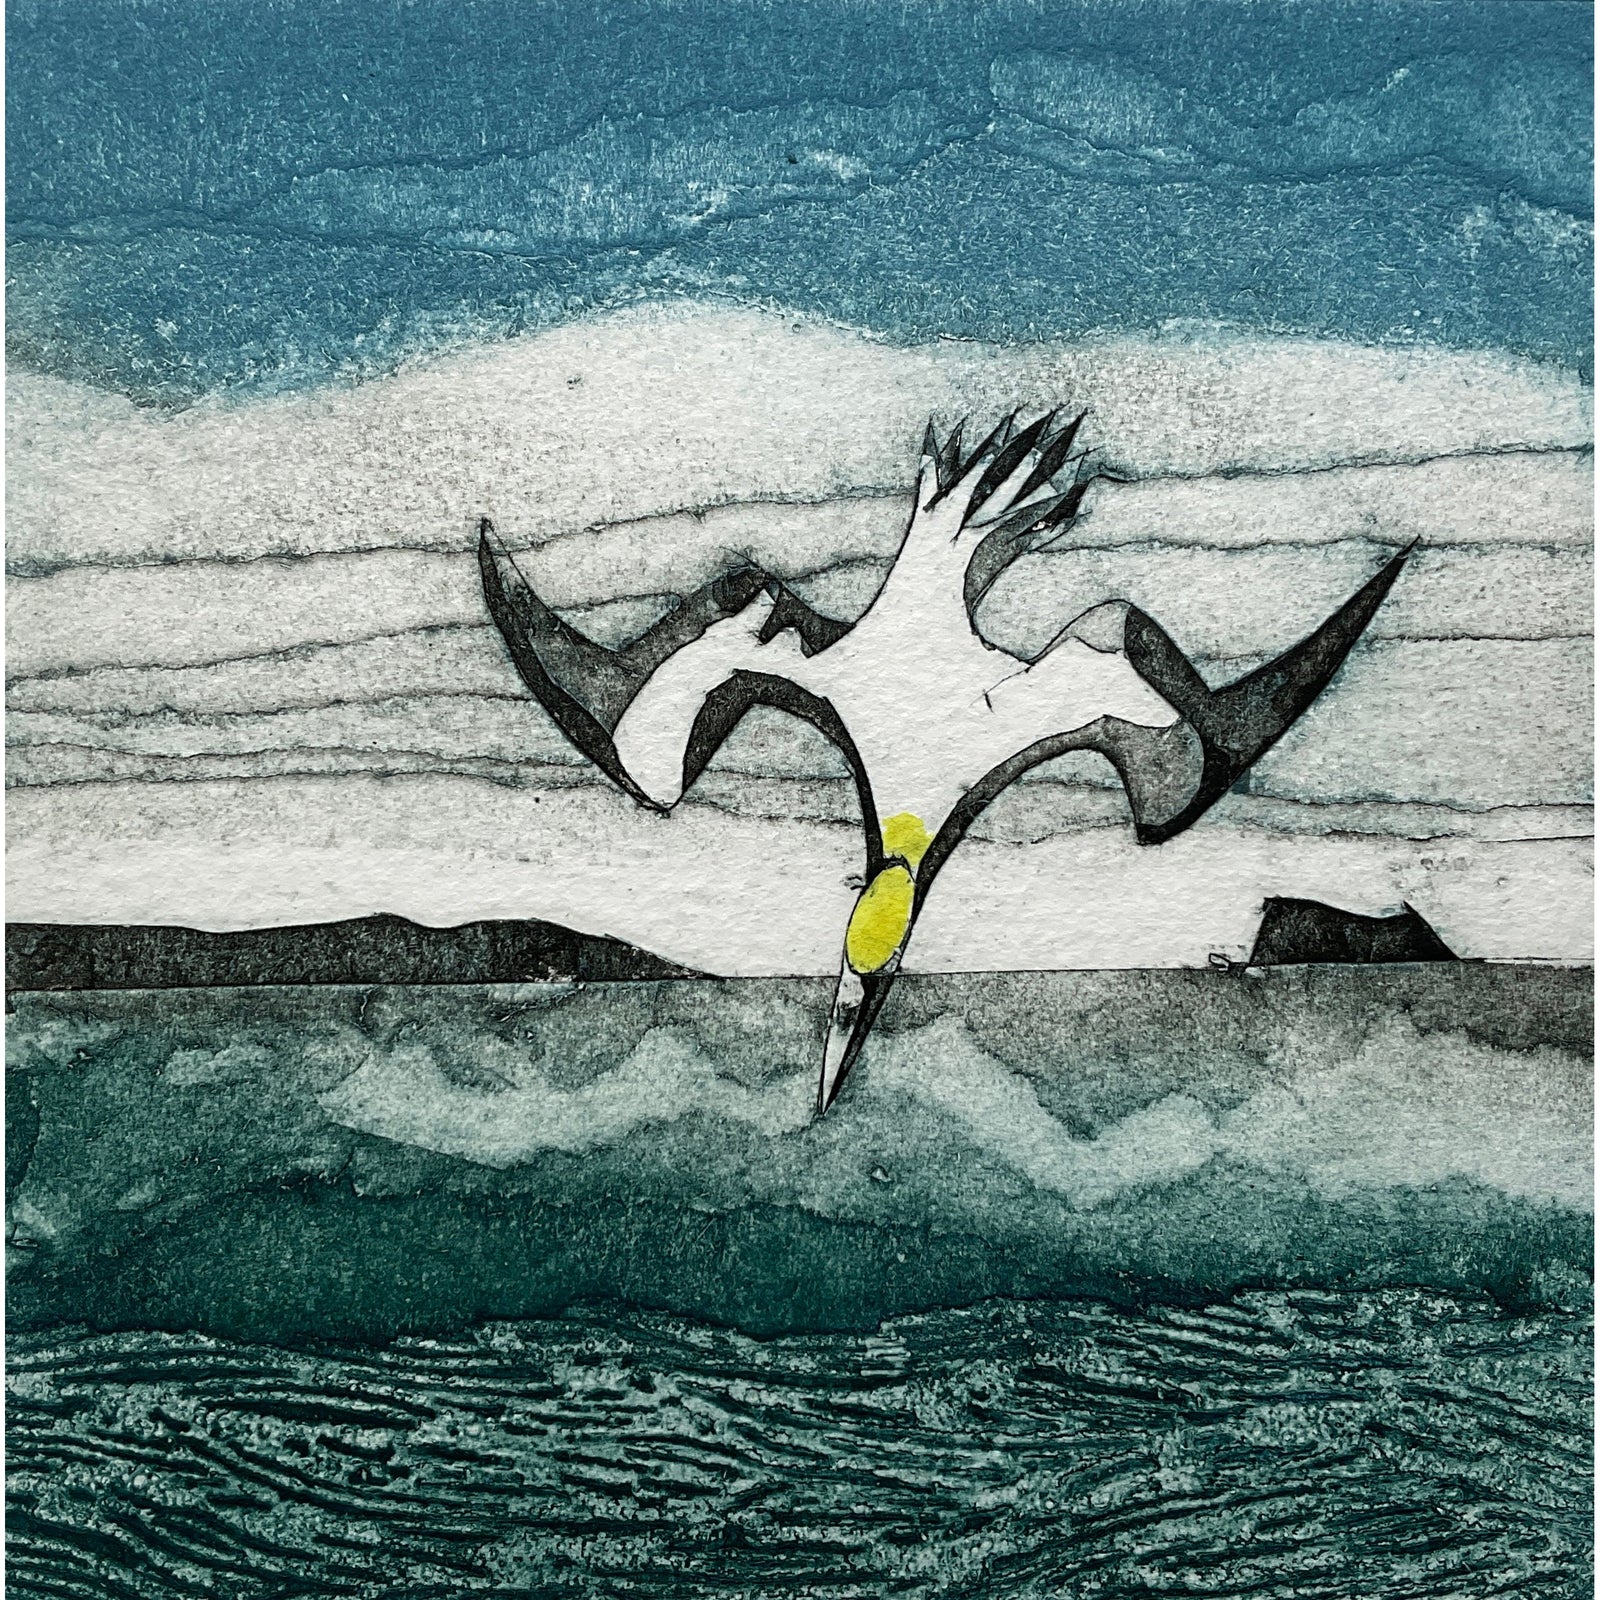 Diving, limited edition collagraph  by Sarah Ross-Thompson available at Padstow Gallery, Cornwall